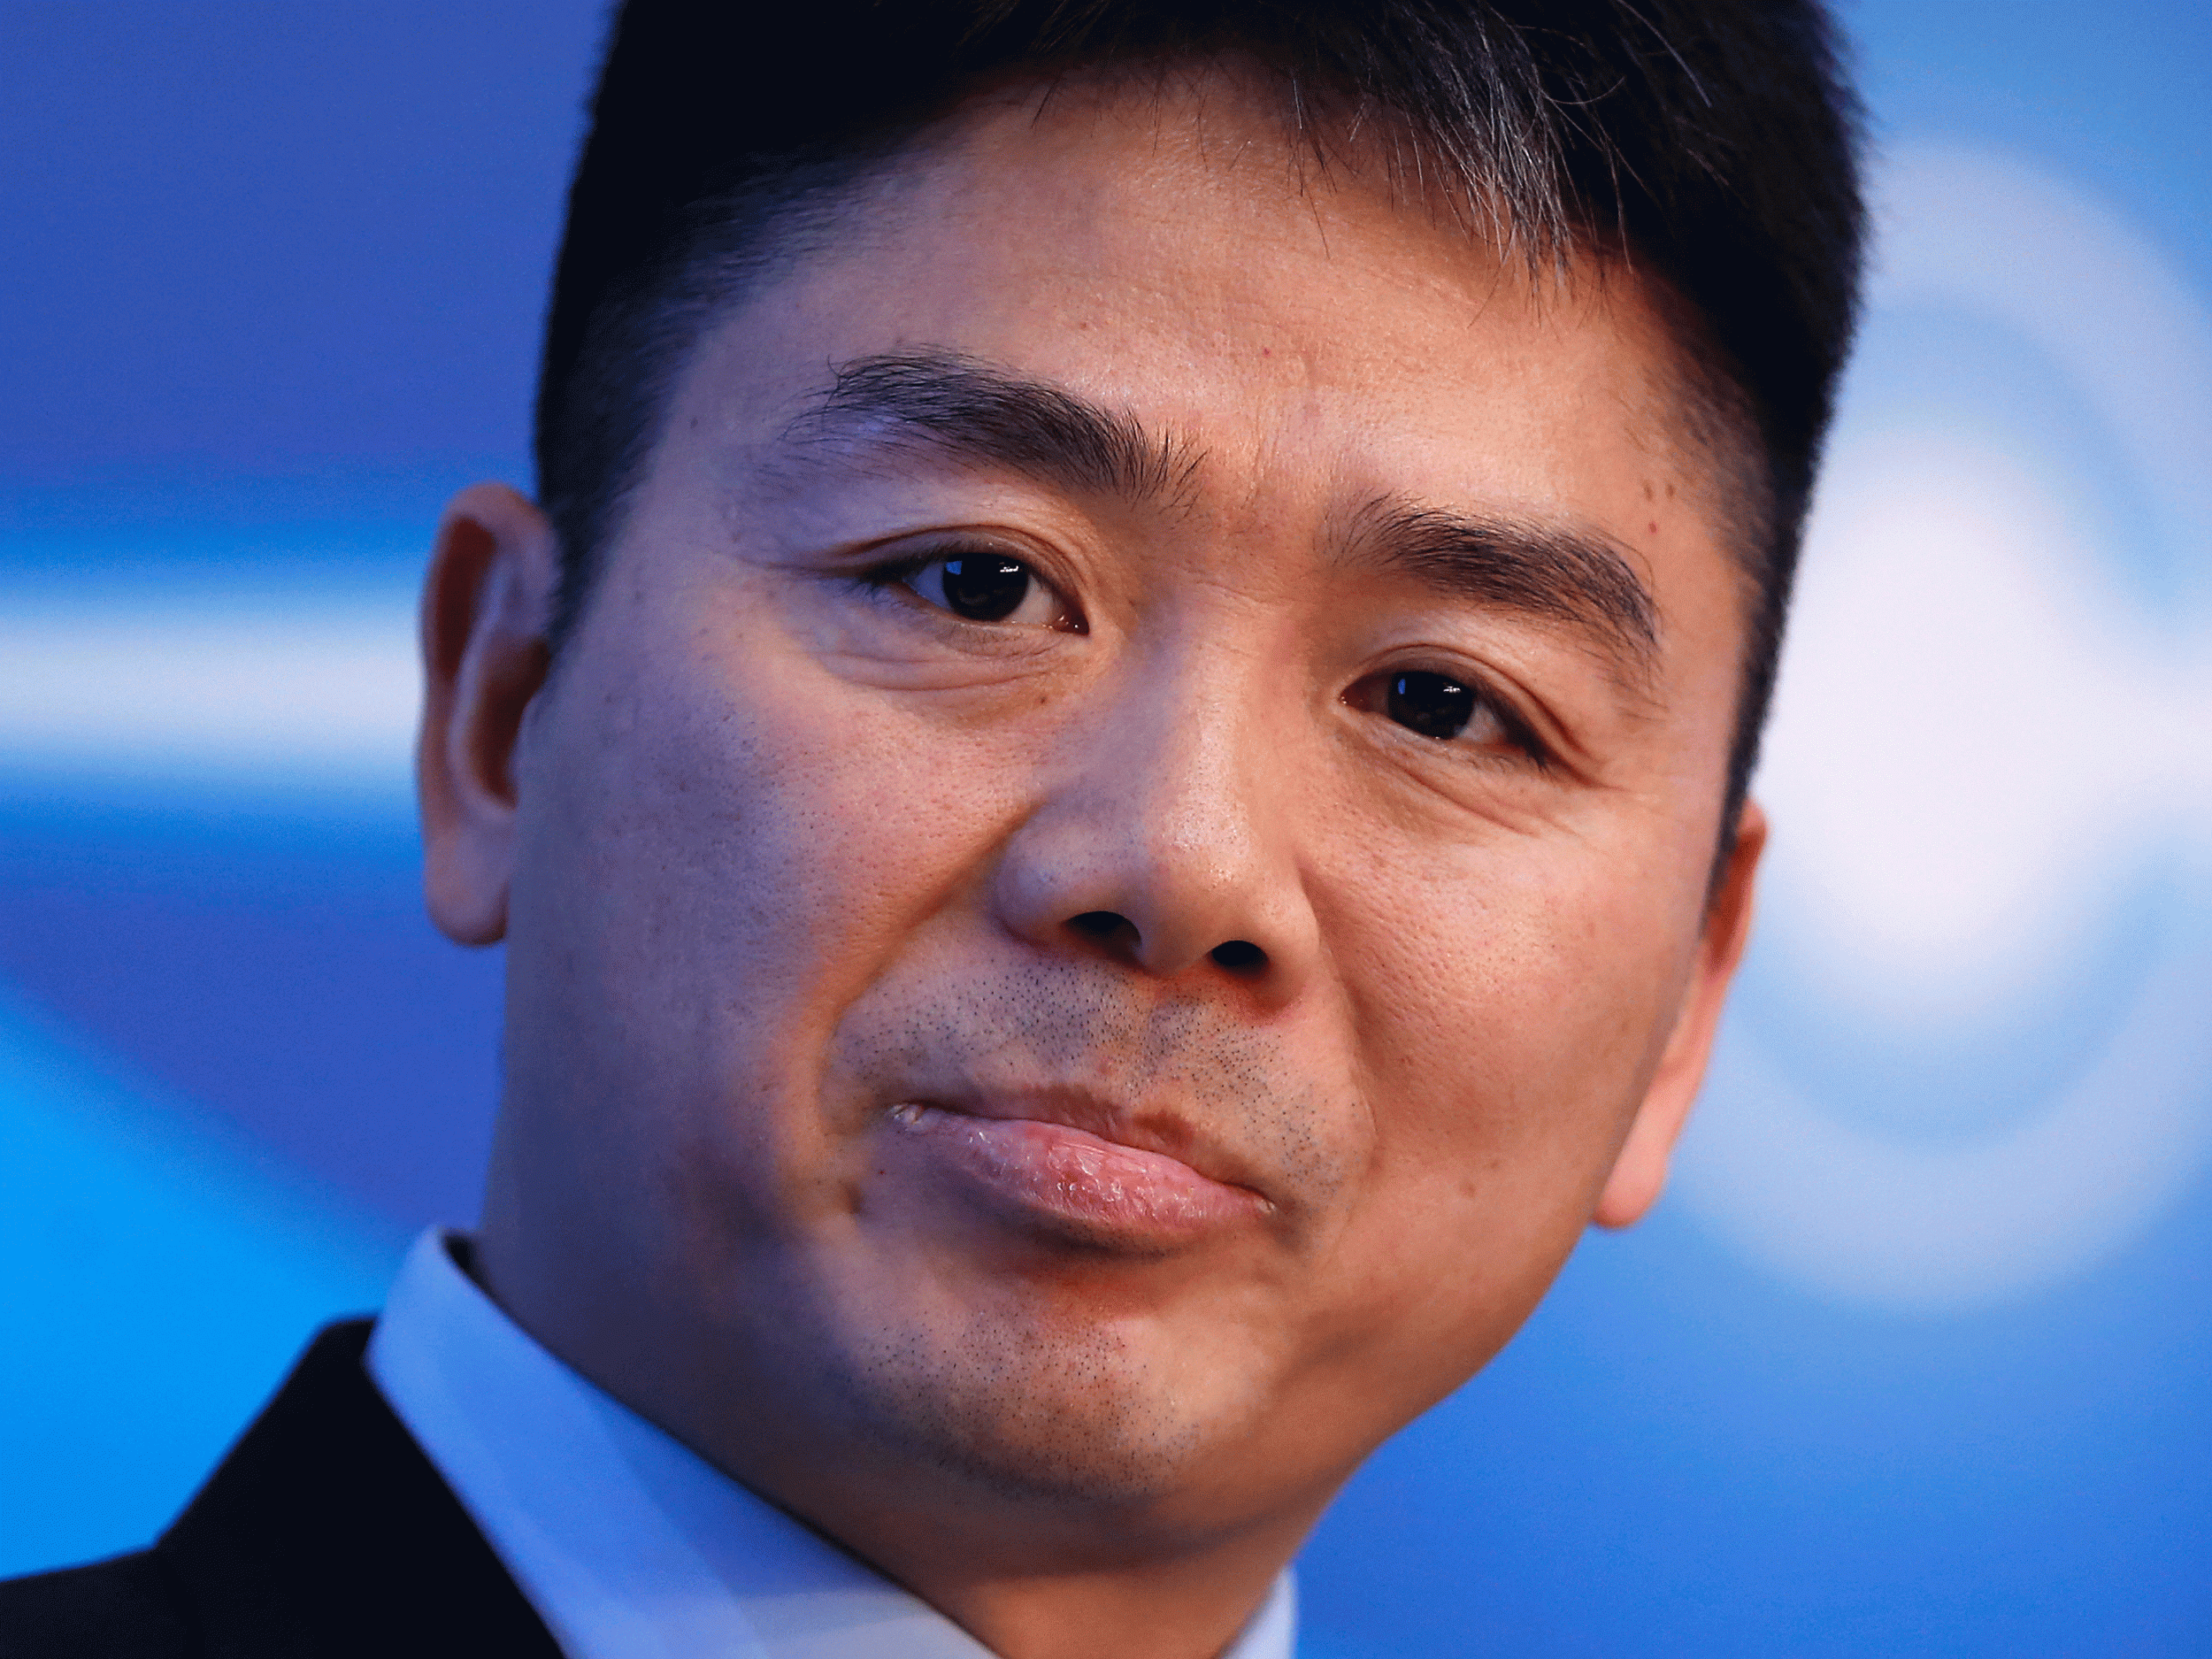 Richard Liu, the founder and chairman of China e-commerce firm JD.com, has been described as China’s answer to Jeff Bezos